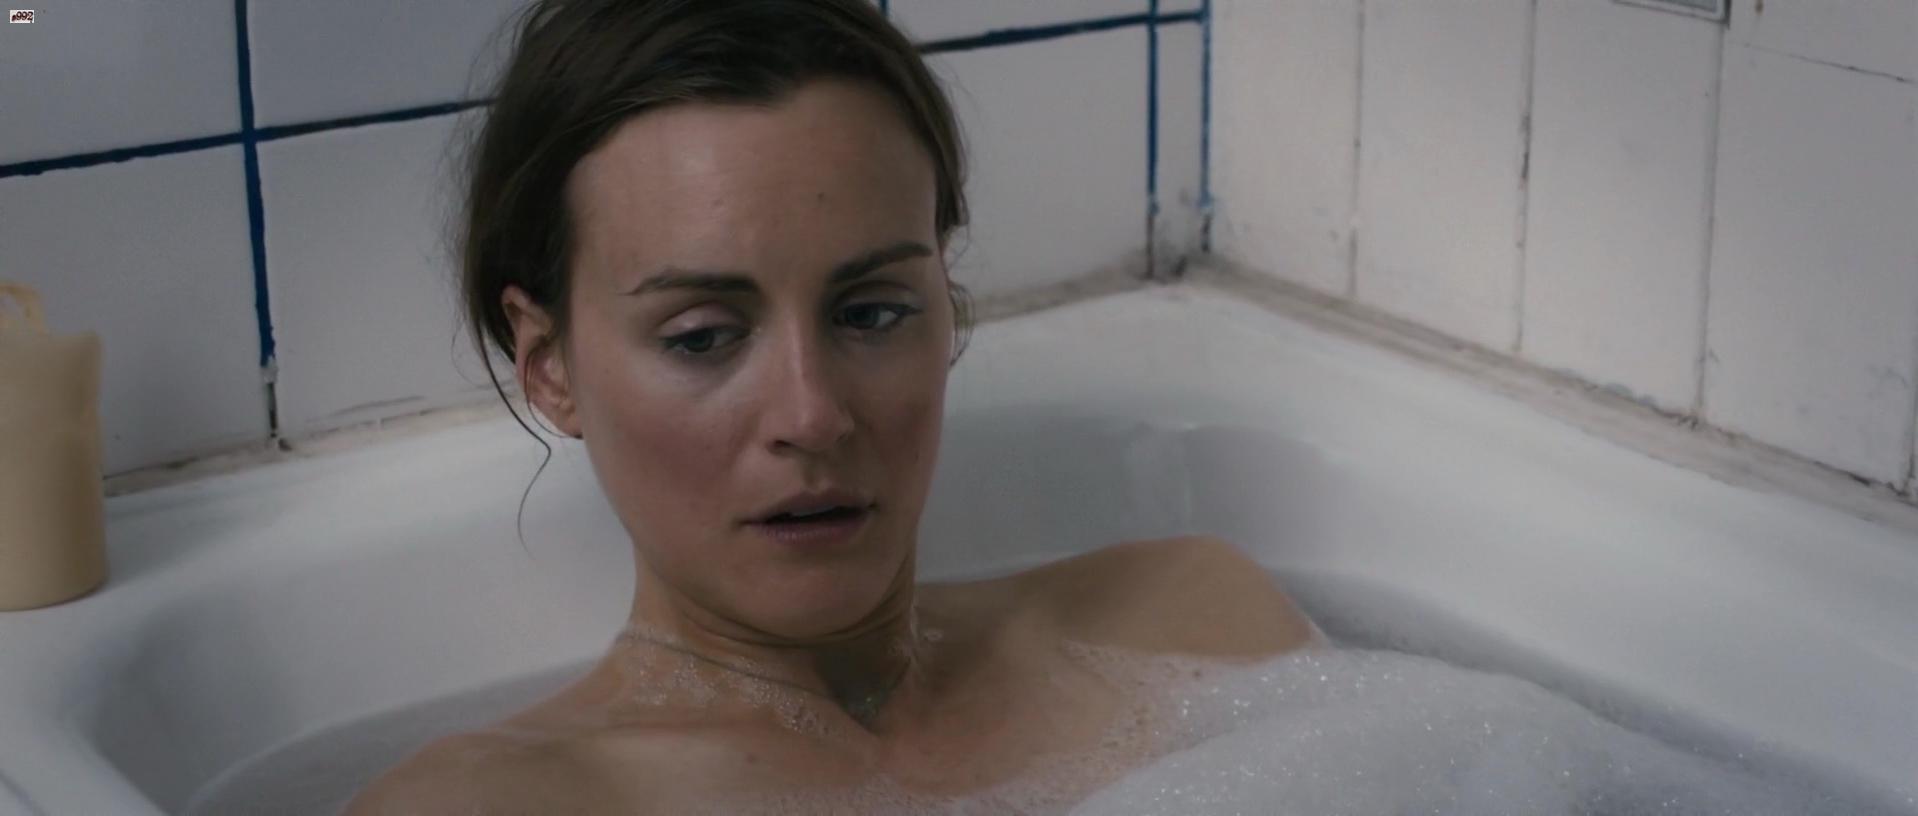 Taylor Schilling nude - Stay (2013)